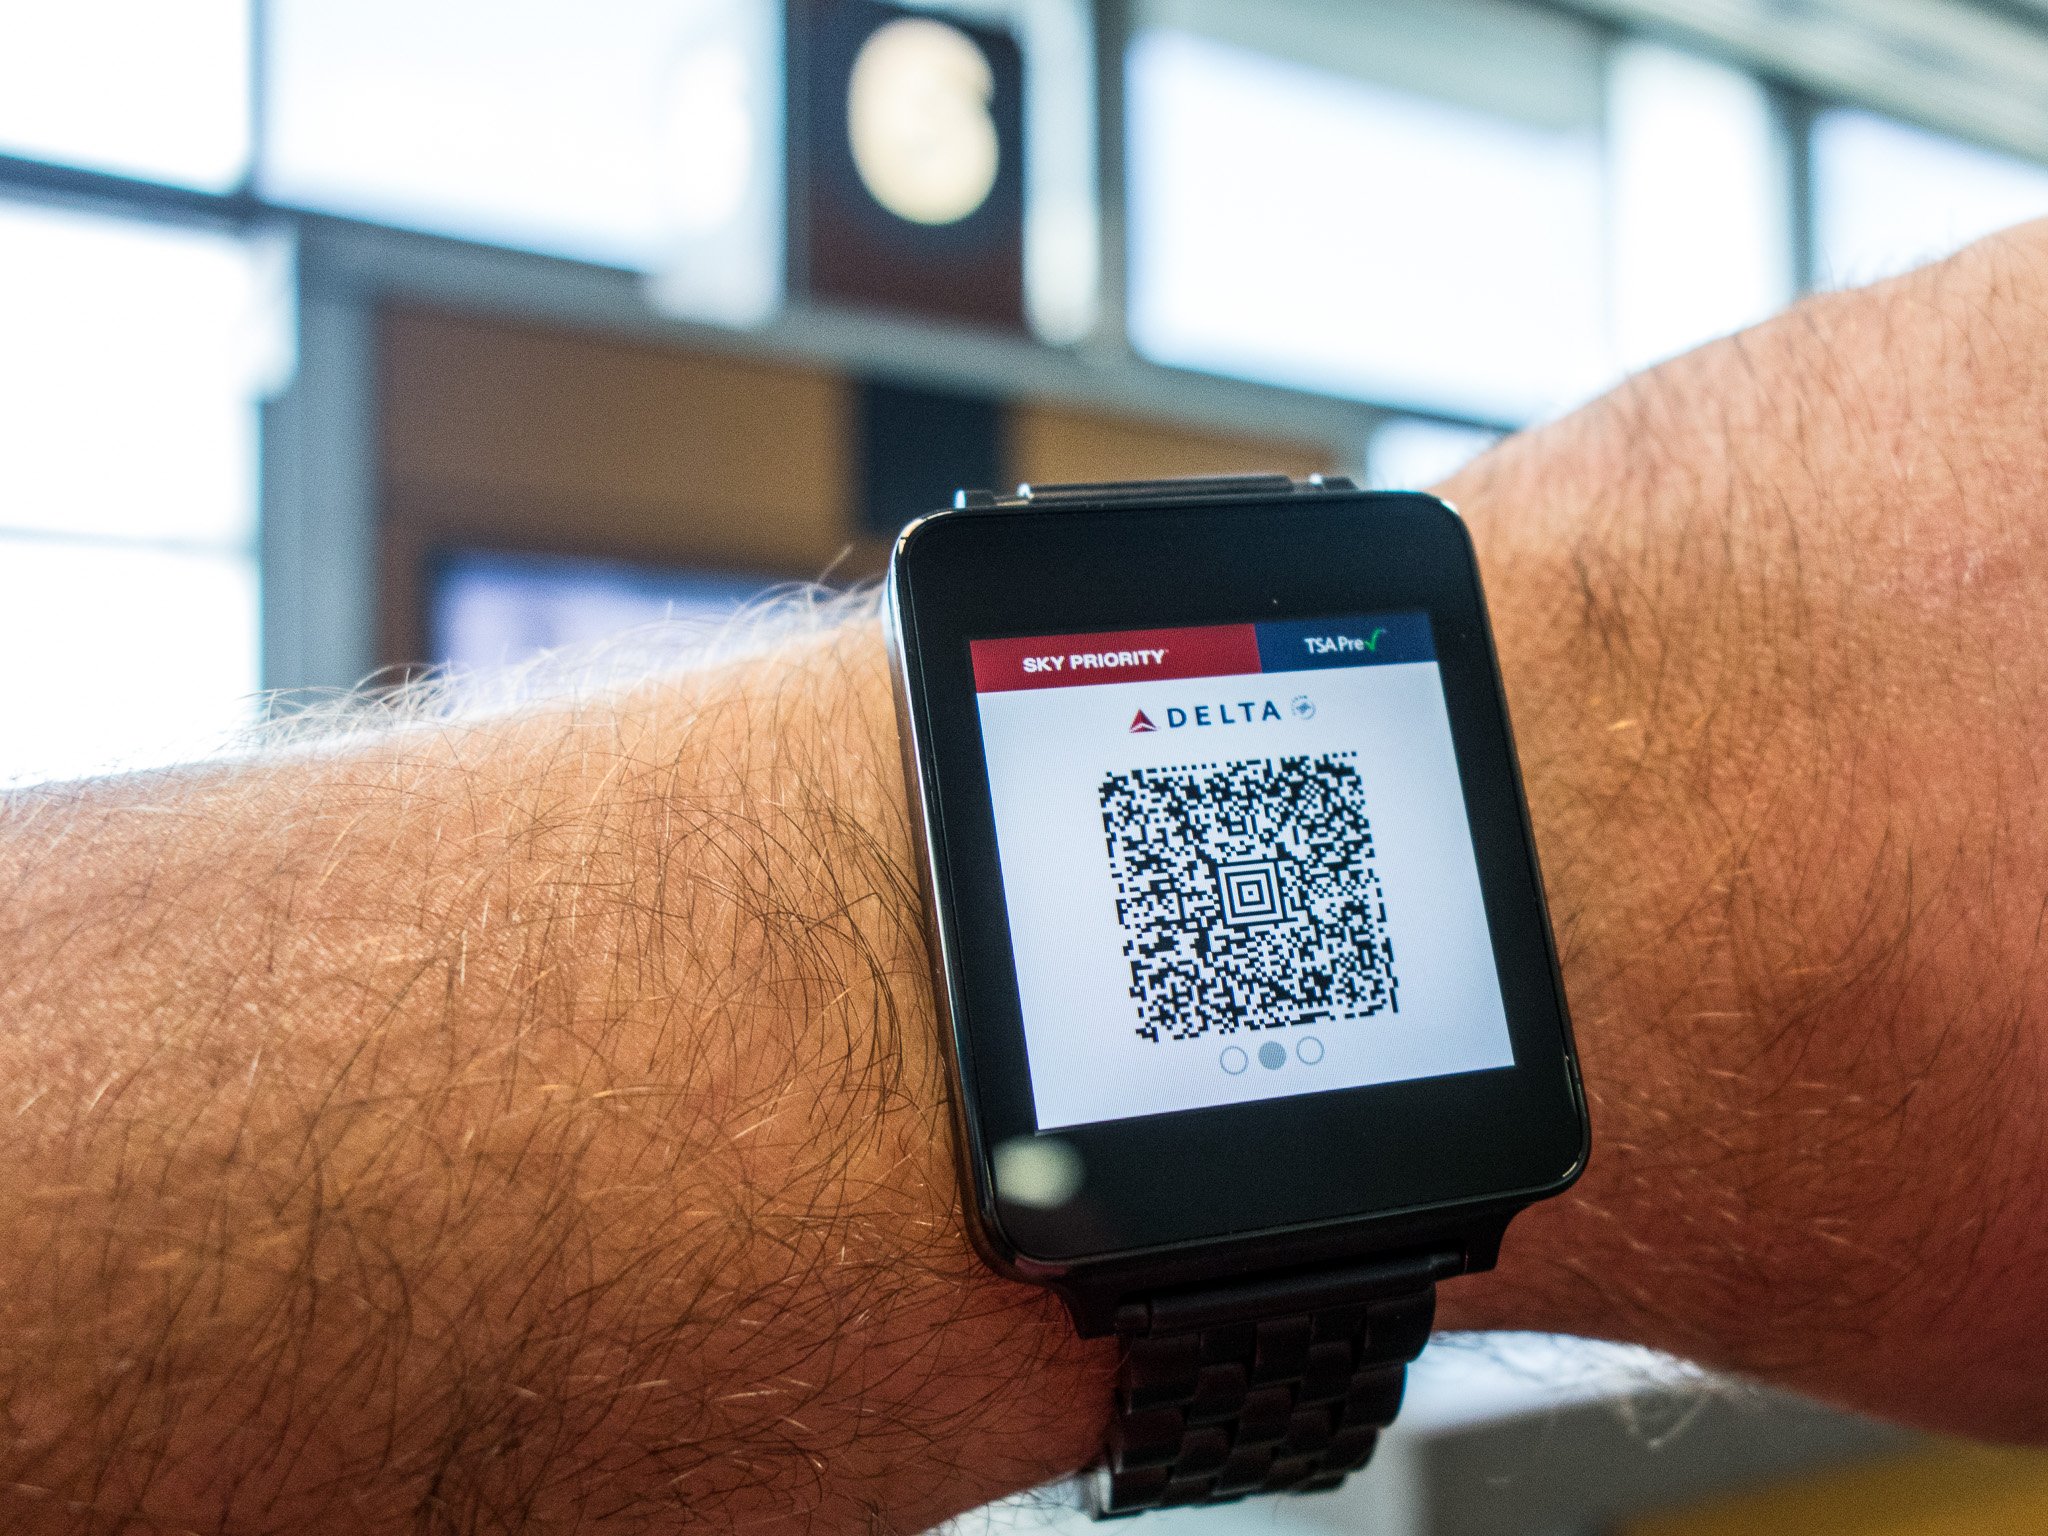 Android Wear boarding pass